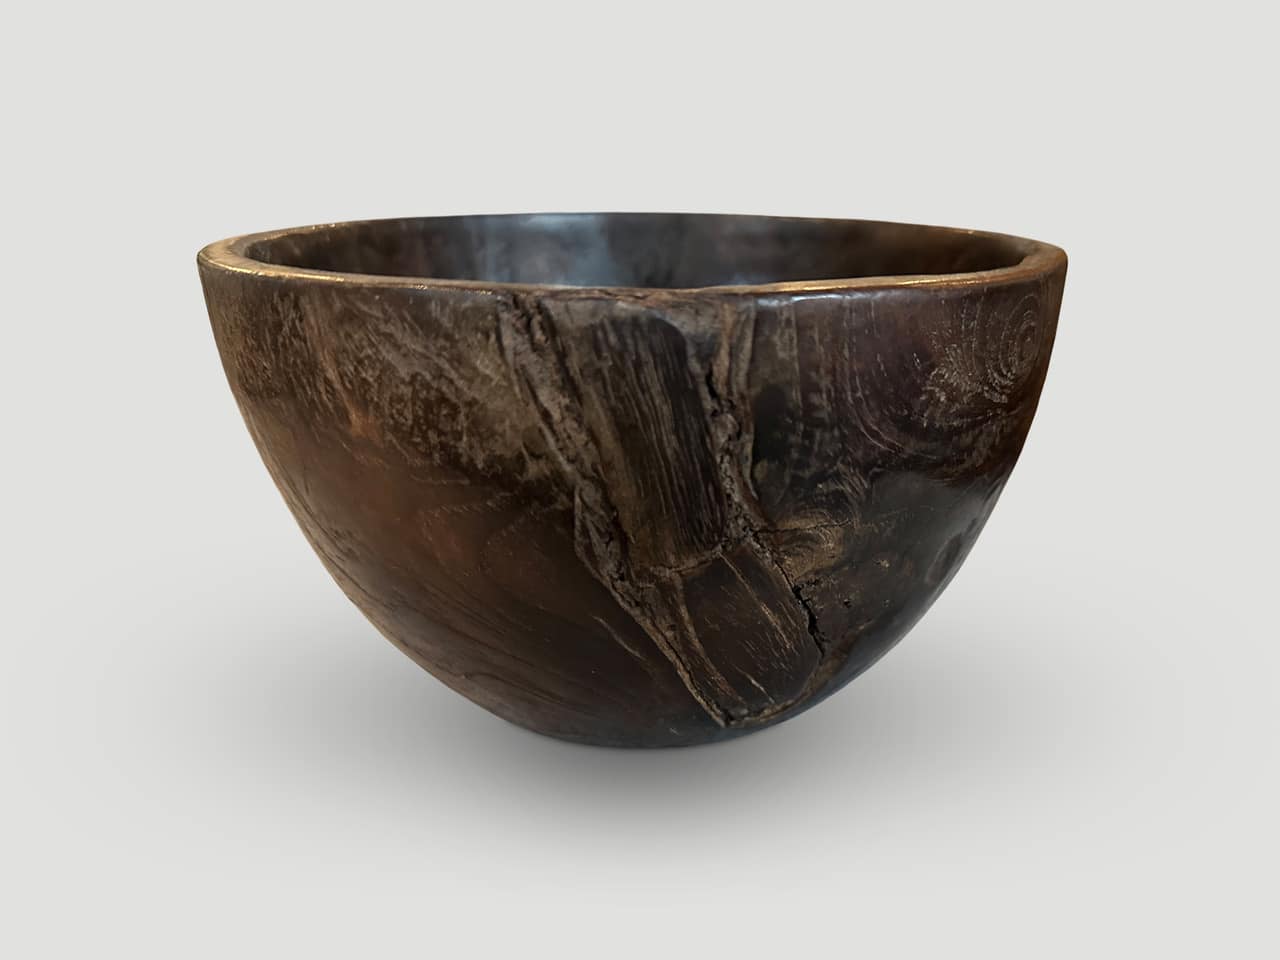 Beautiful antique bowl hand carved from a single piece of teak wood